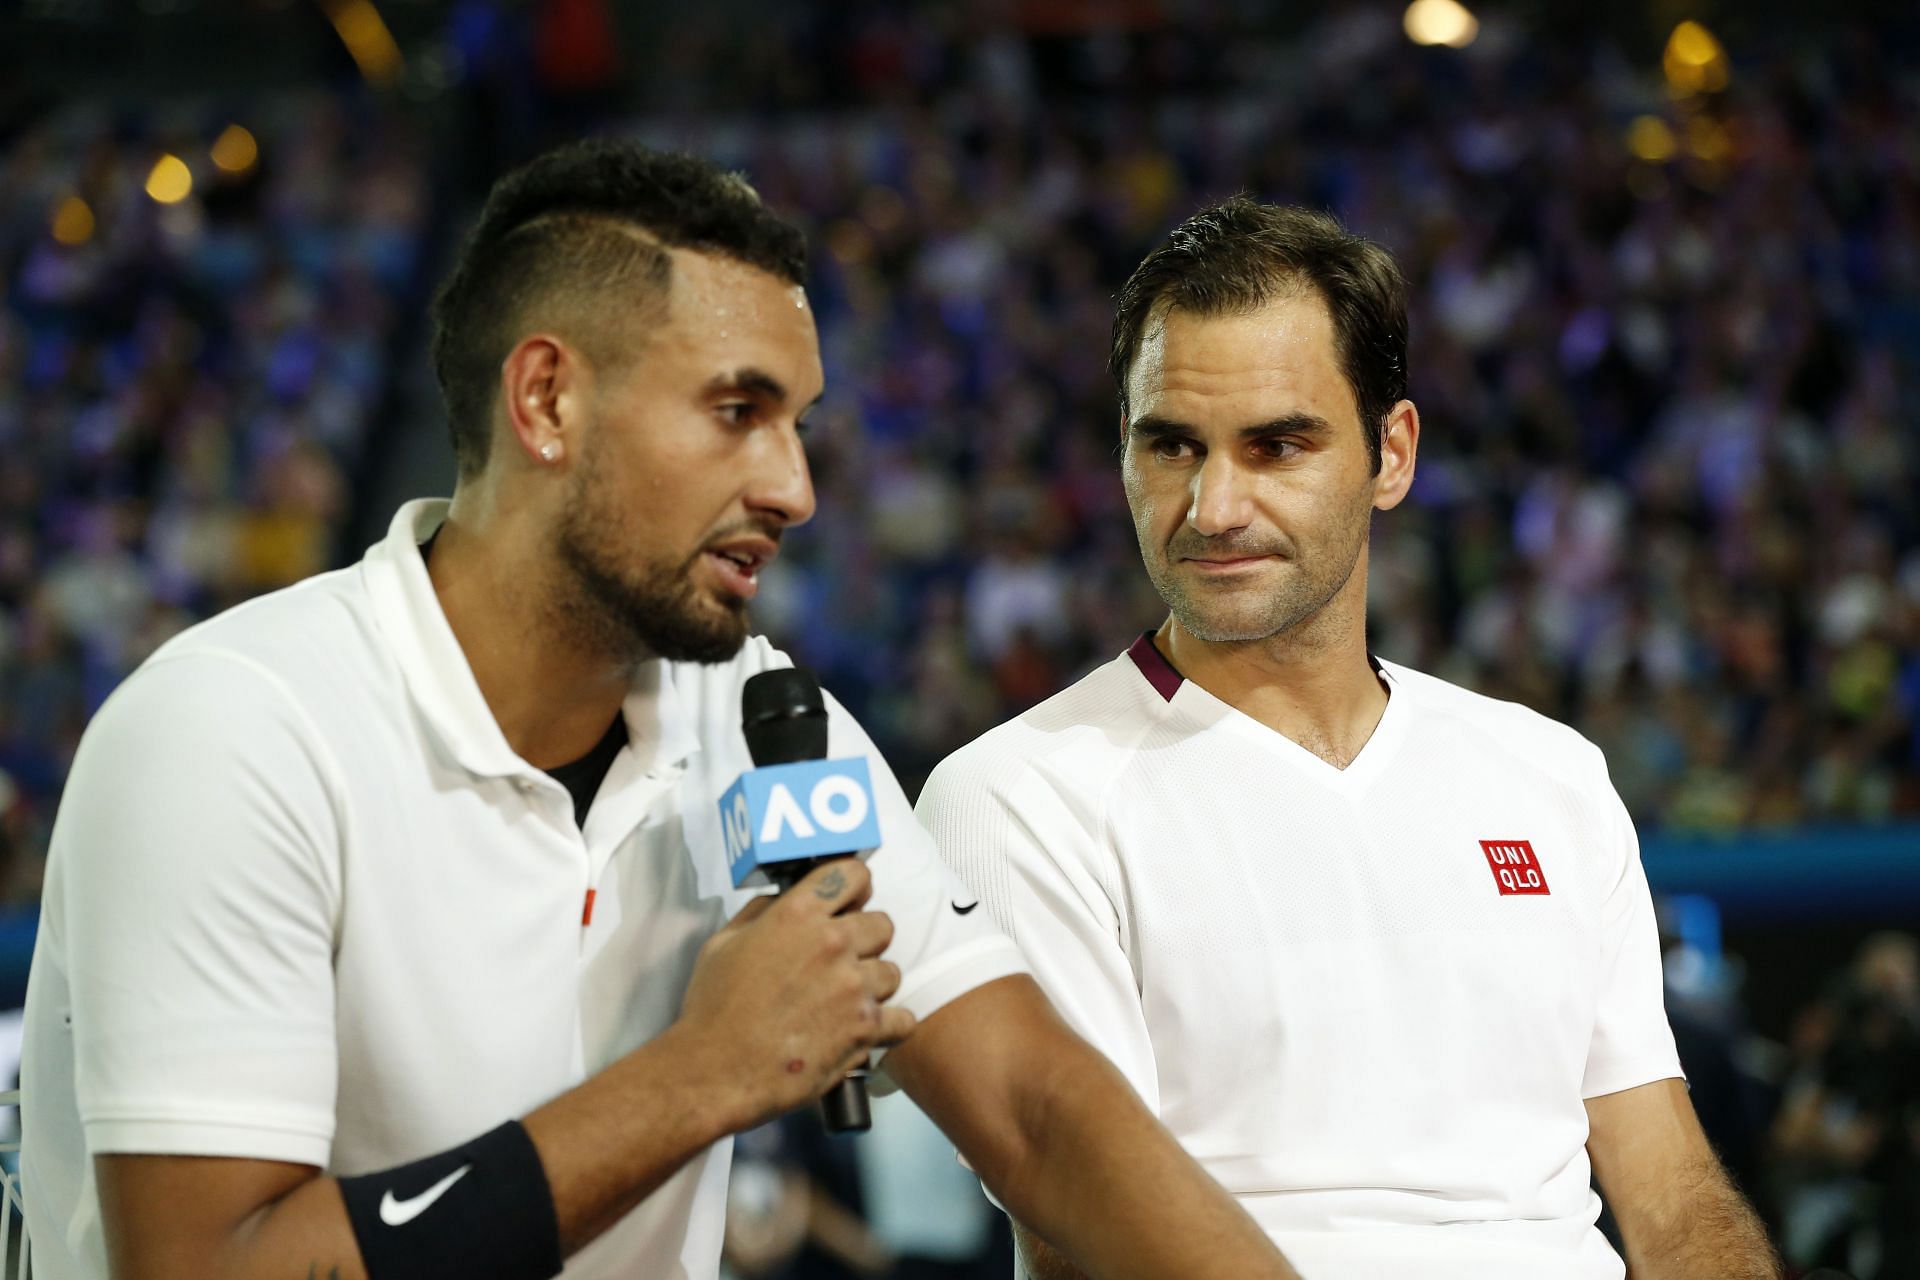 Nick Kyrgios (L) and Roger Federer (R) at the Tennis Rally for Relief ahead of the 2020 Australian Open